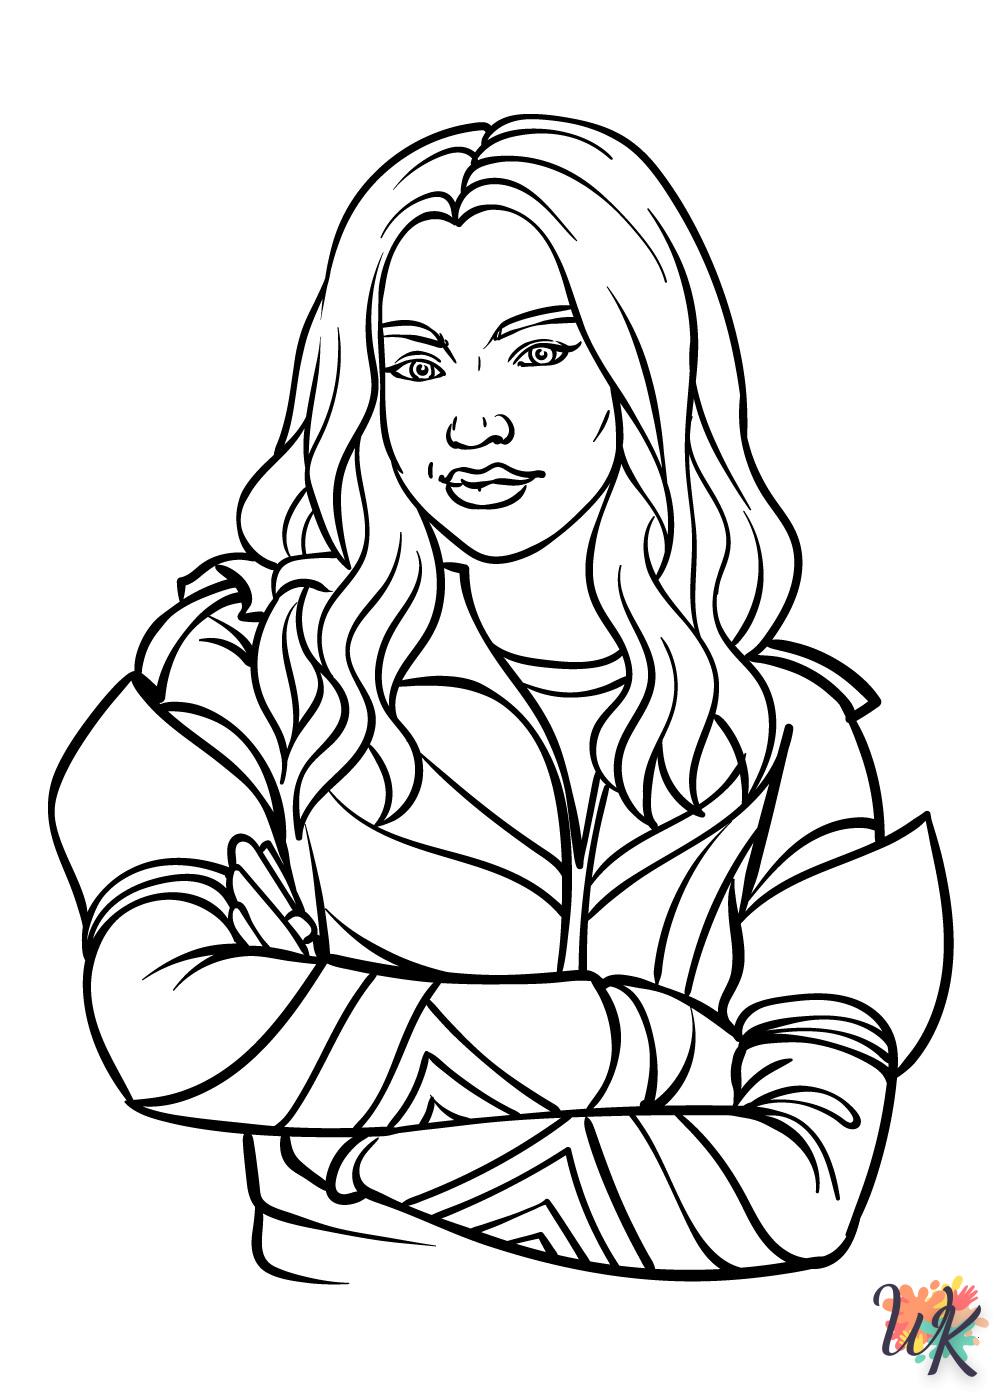 Disney coloring page to print a4 4